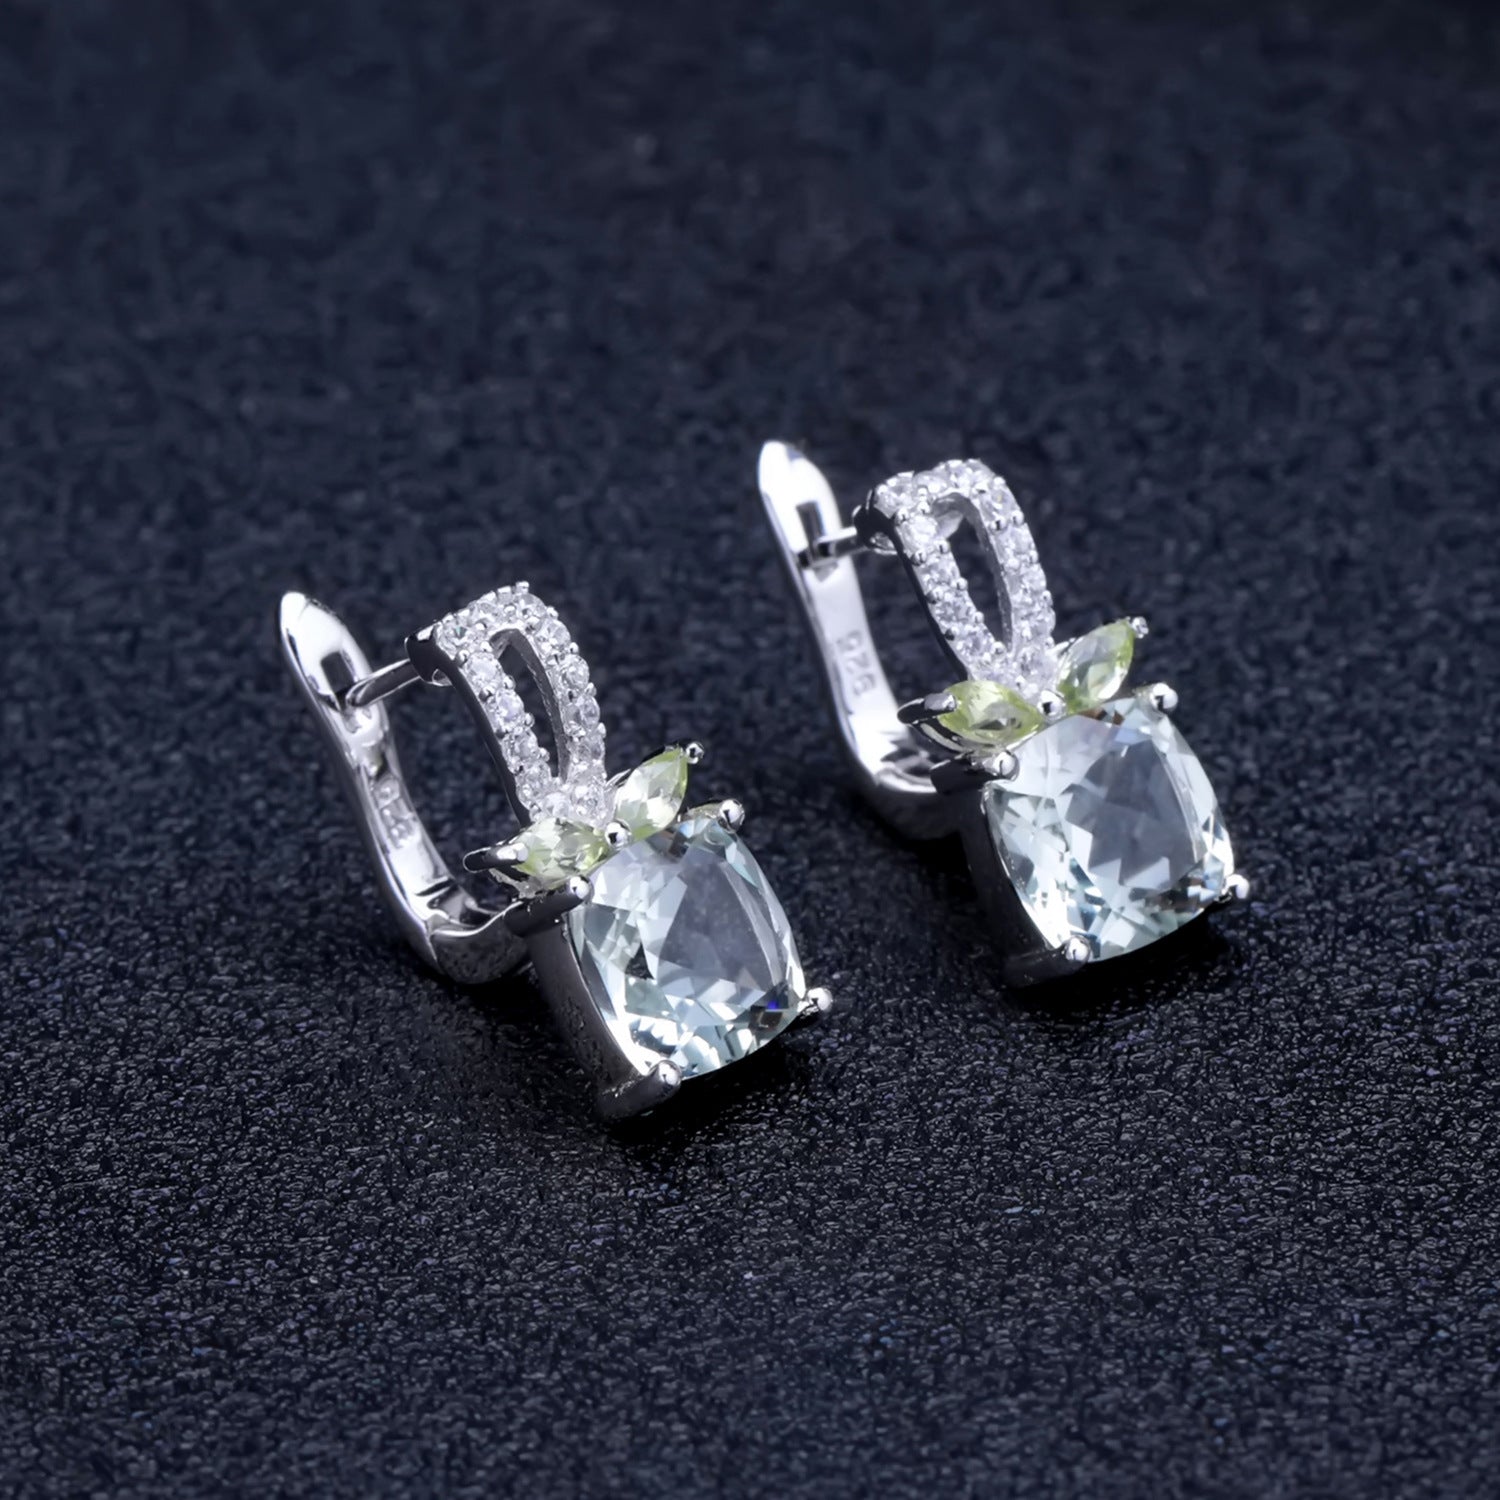 Fashion Luxurious Design Inlaid Natural Green Crystal Square Silver Studs Earrings for Women